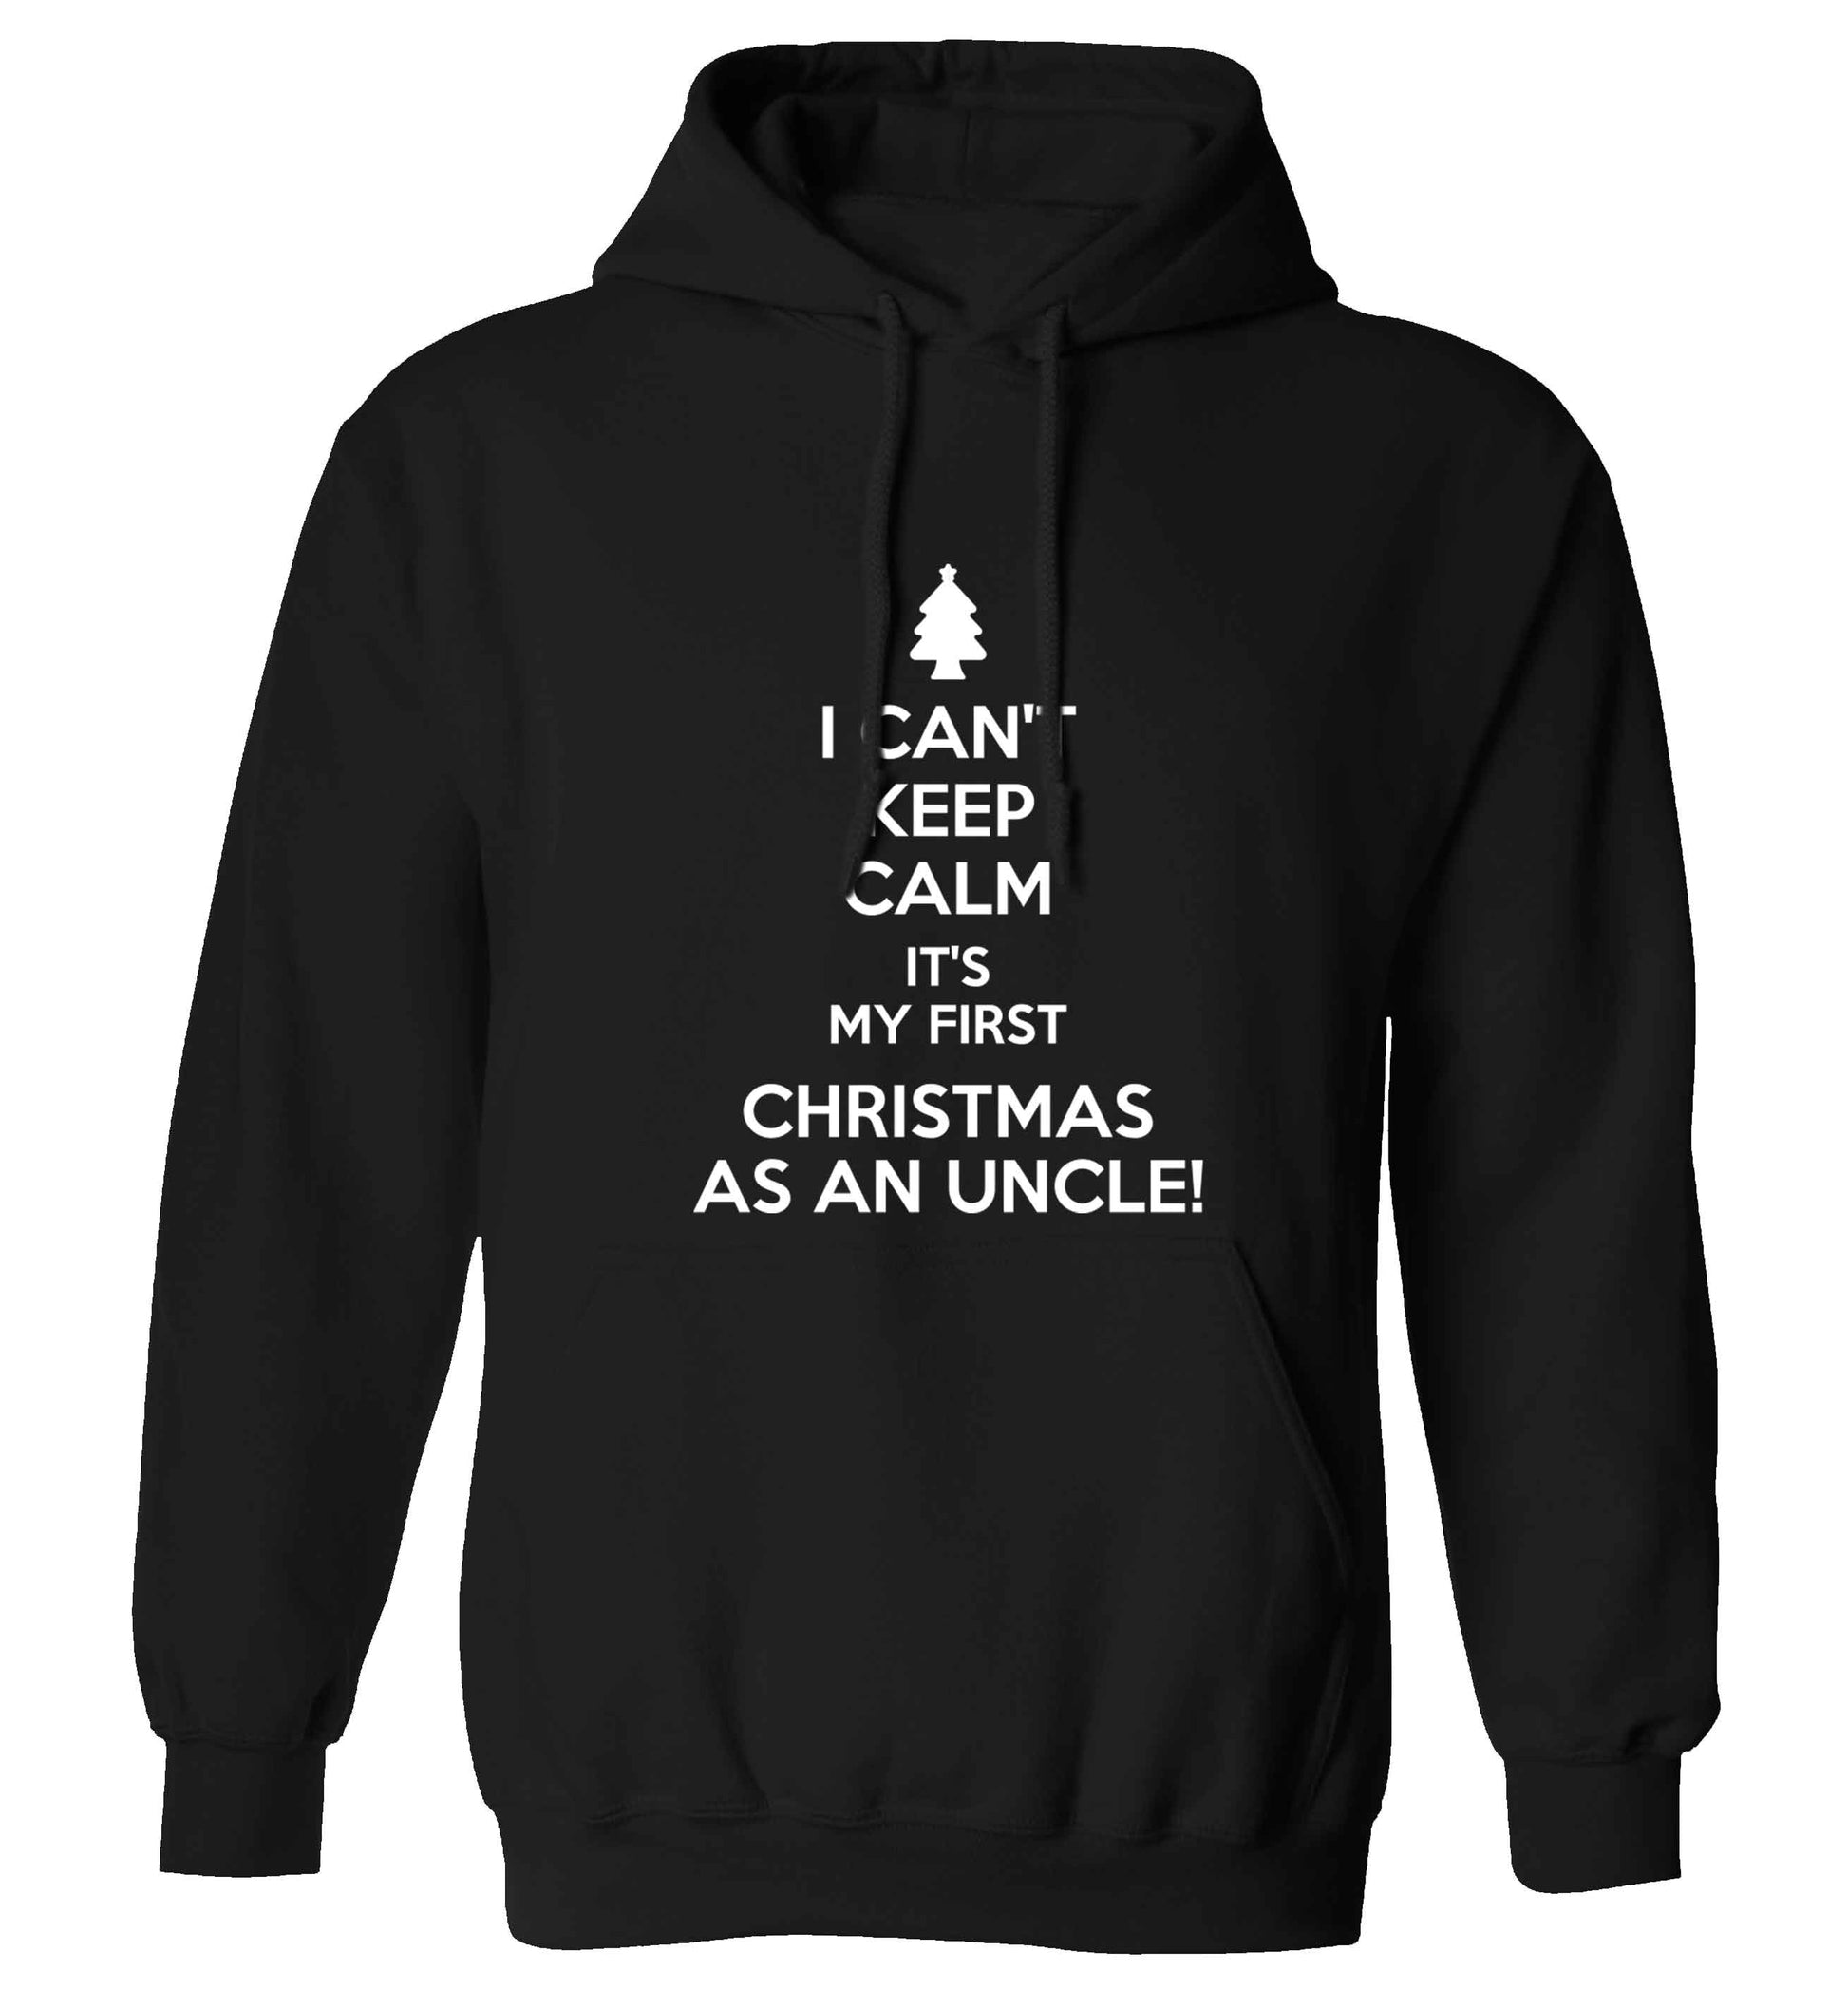 I can't keep calm it's my first Christmas as an uncle! adults unisex black hoodie 2XL